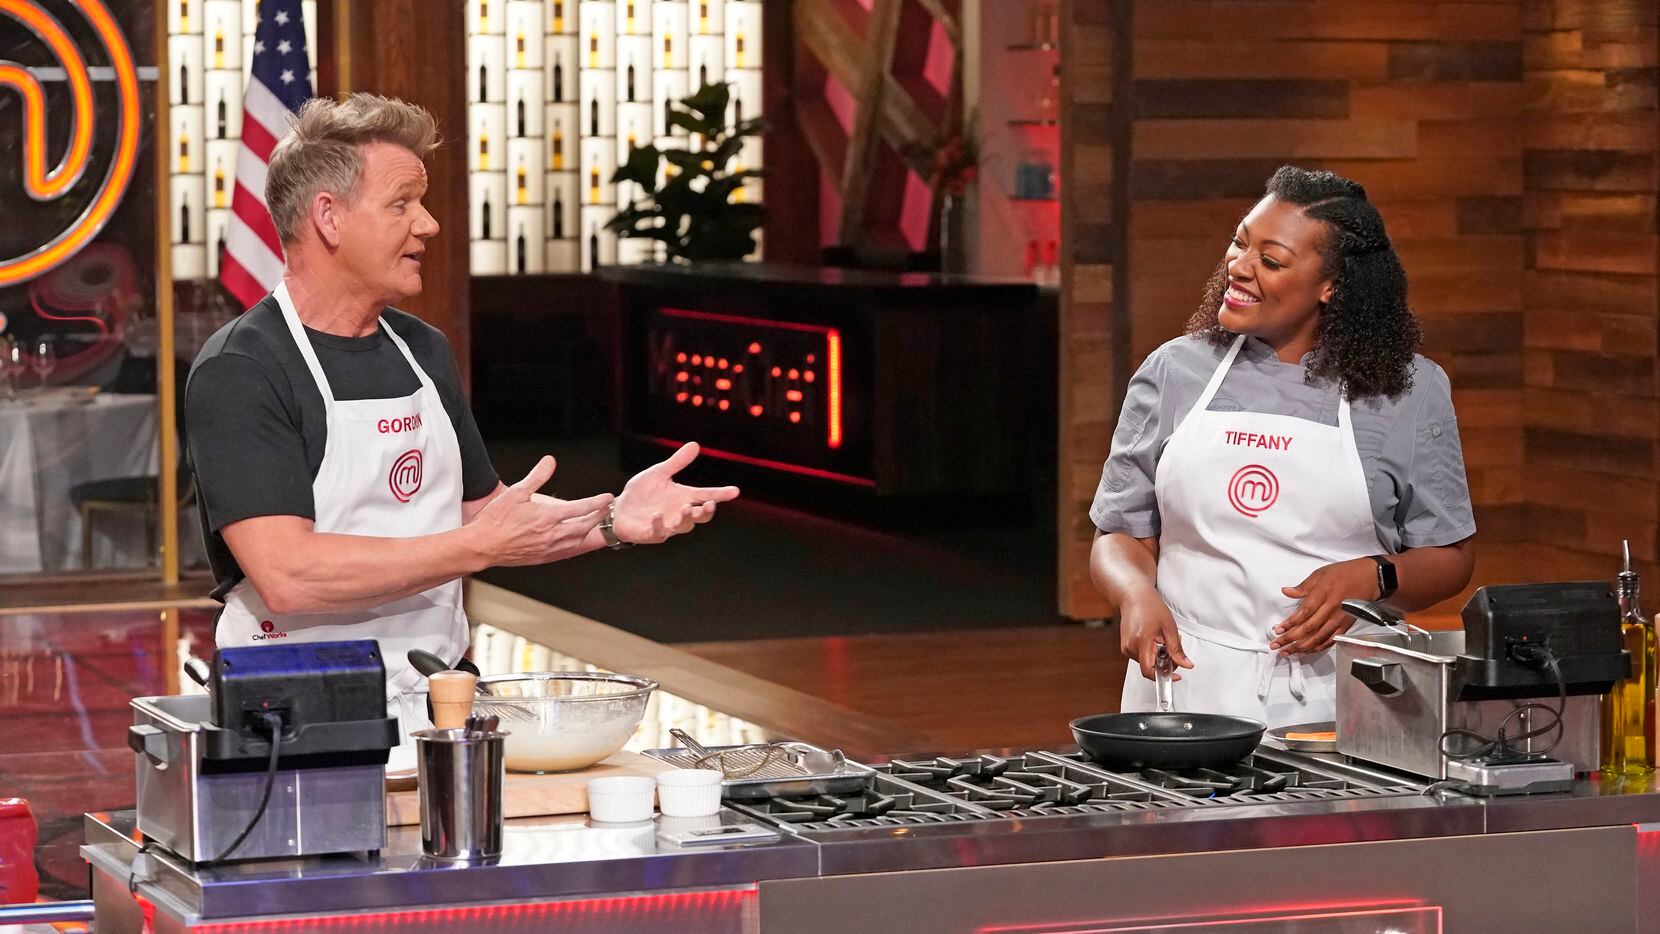 'MasterChef' host and celebrity chef Gordon Ramsay cooked with guest judge and North Texan...